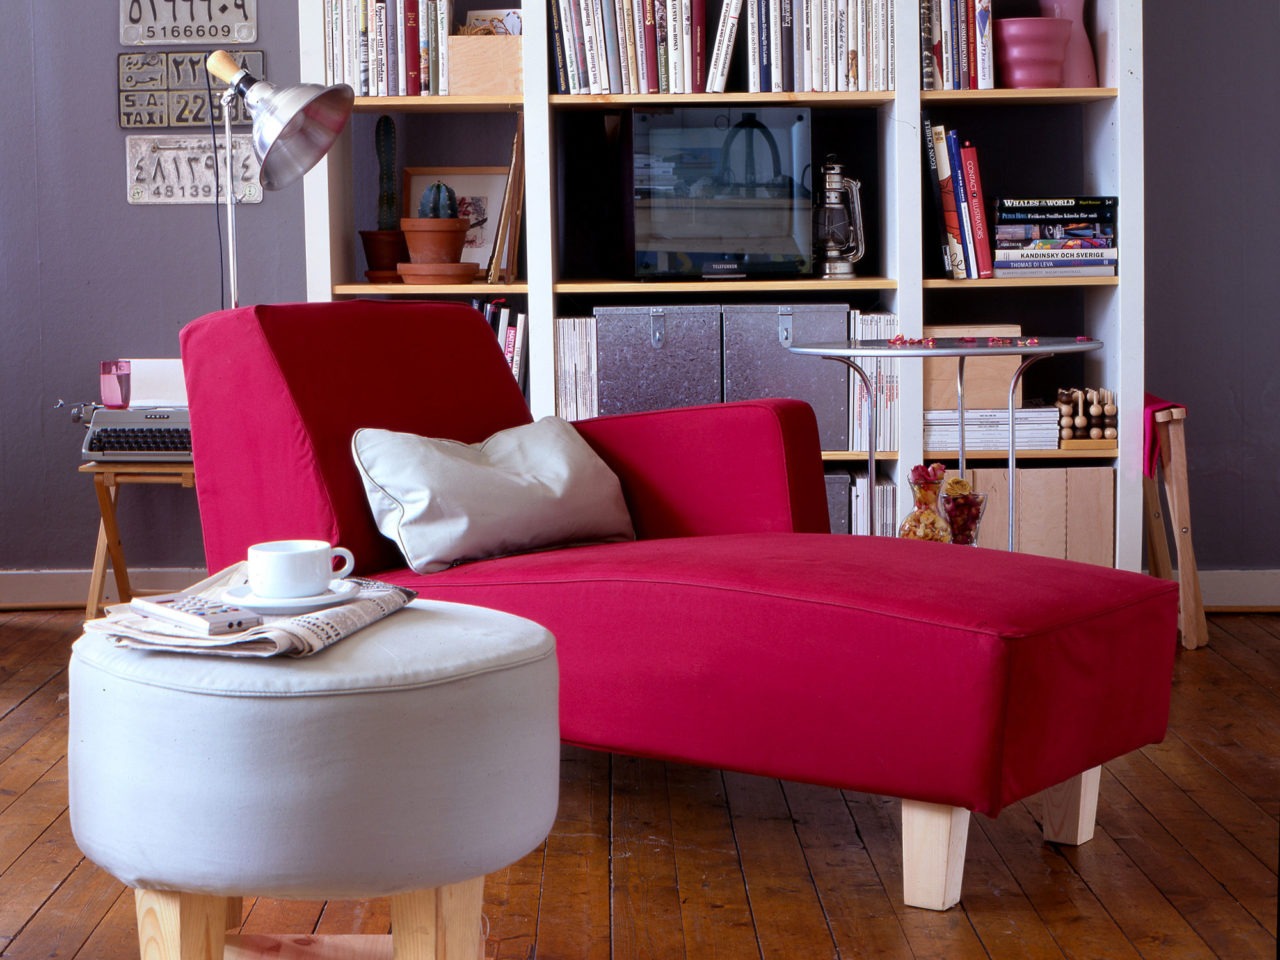 Near a bookcase with books on is a red divan in robust yet simple style. Nearby is a round, light stool in a similar design.